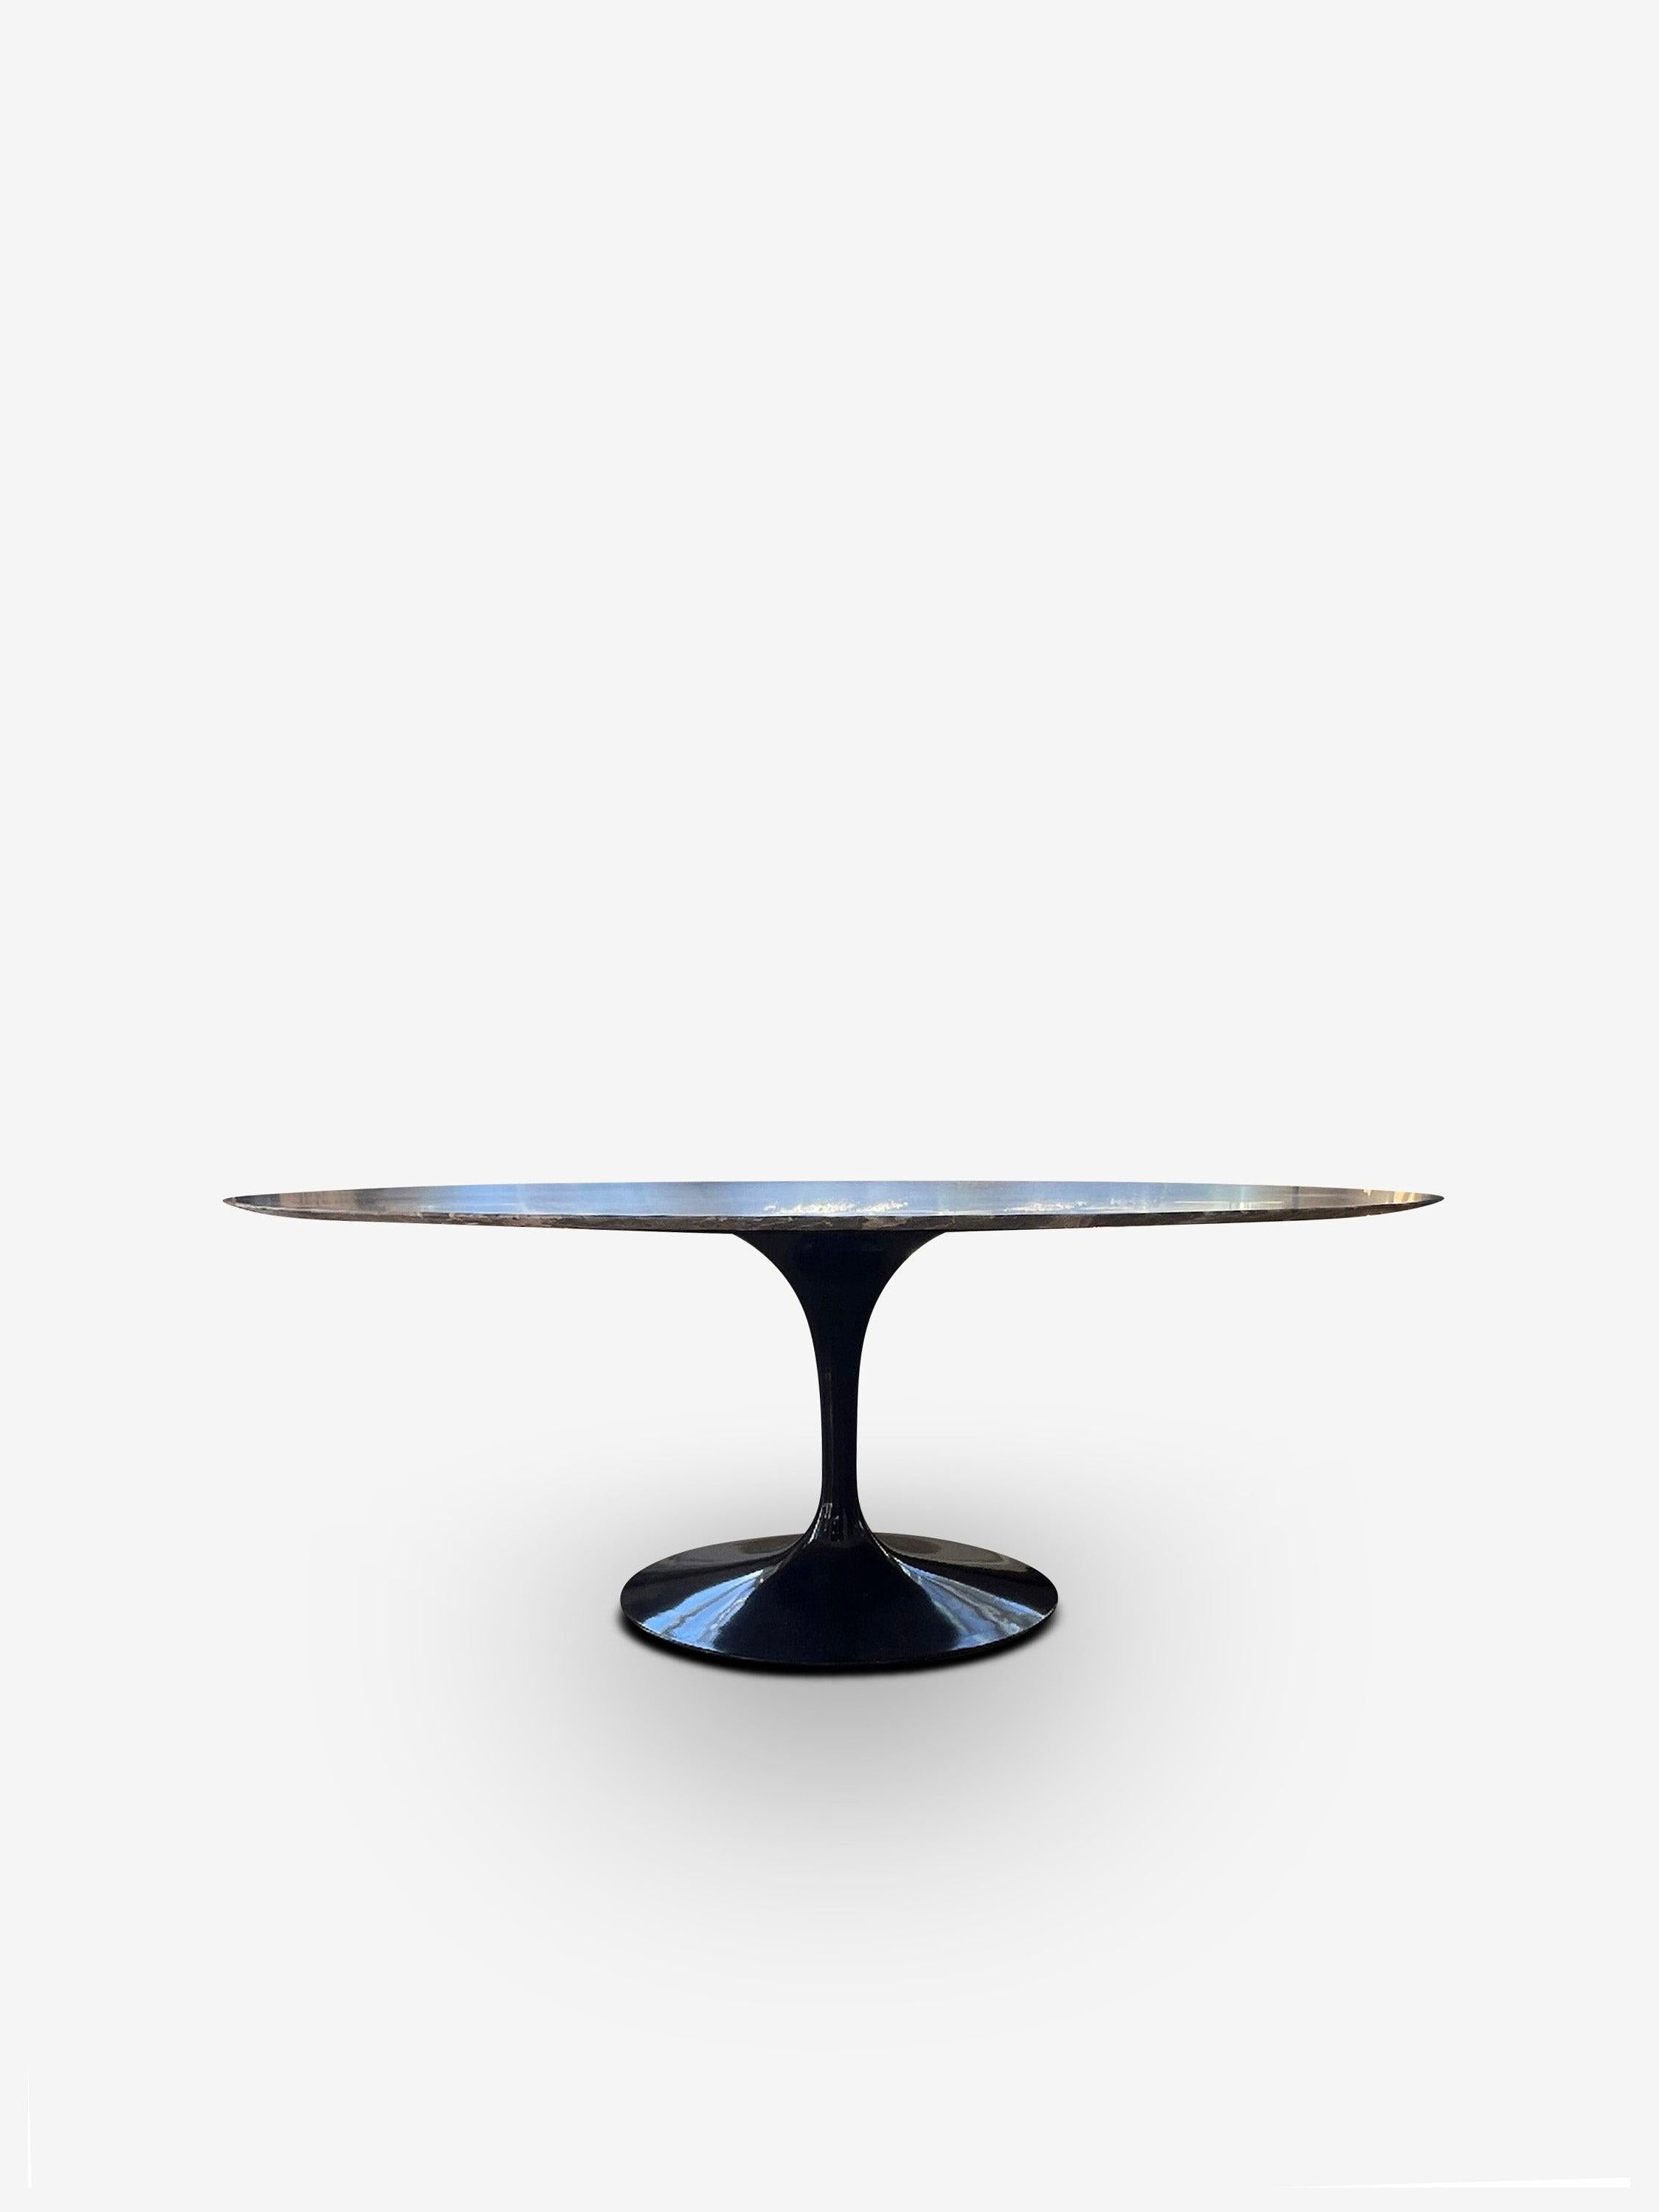 Eero Saarinen Medium Oval Grey Marble Dining Table with Black Base by Knoll For Sale 1